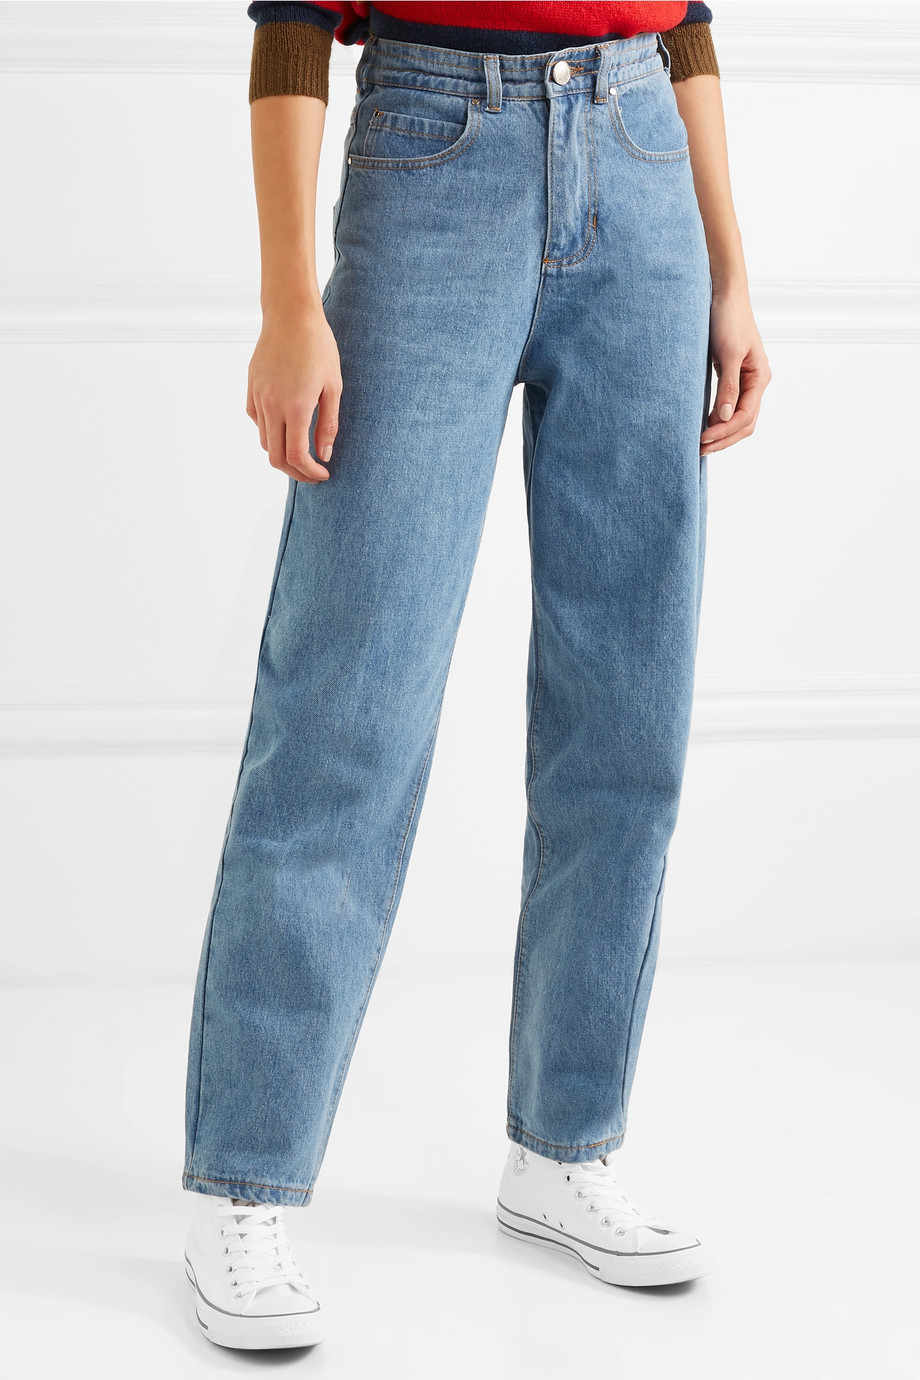 blue jeans with stretch waistband